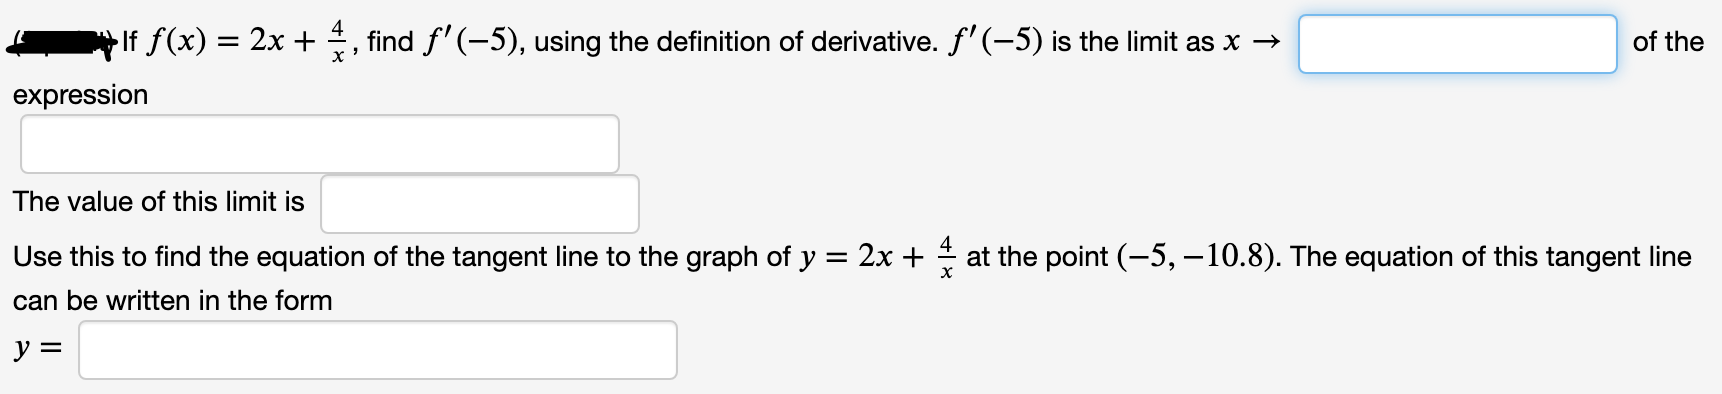 If f(x) = 2x + , find f'(-5), using the definition of derivative. f' (-5) is the limit as x →
of the
expression
The value of this limit is
Use this to find the equation of the tangent line to the graph of y = 2x + at the point (-5, -10.8). The equation of this tangent line
can be written in the form
